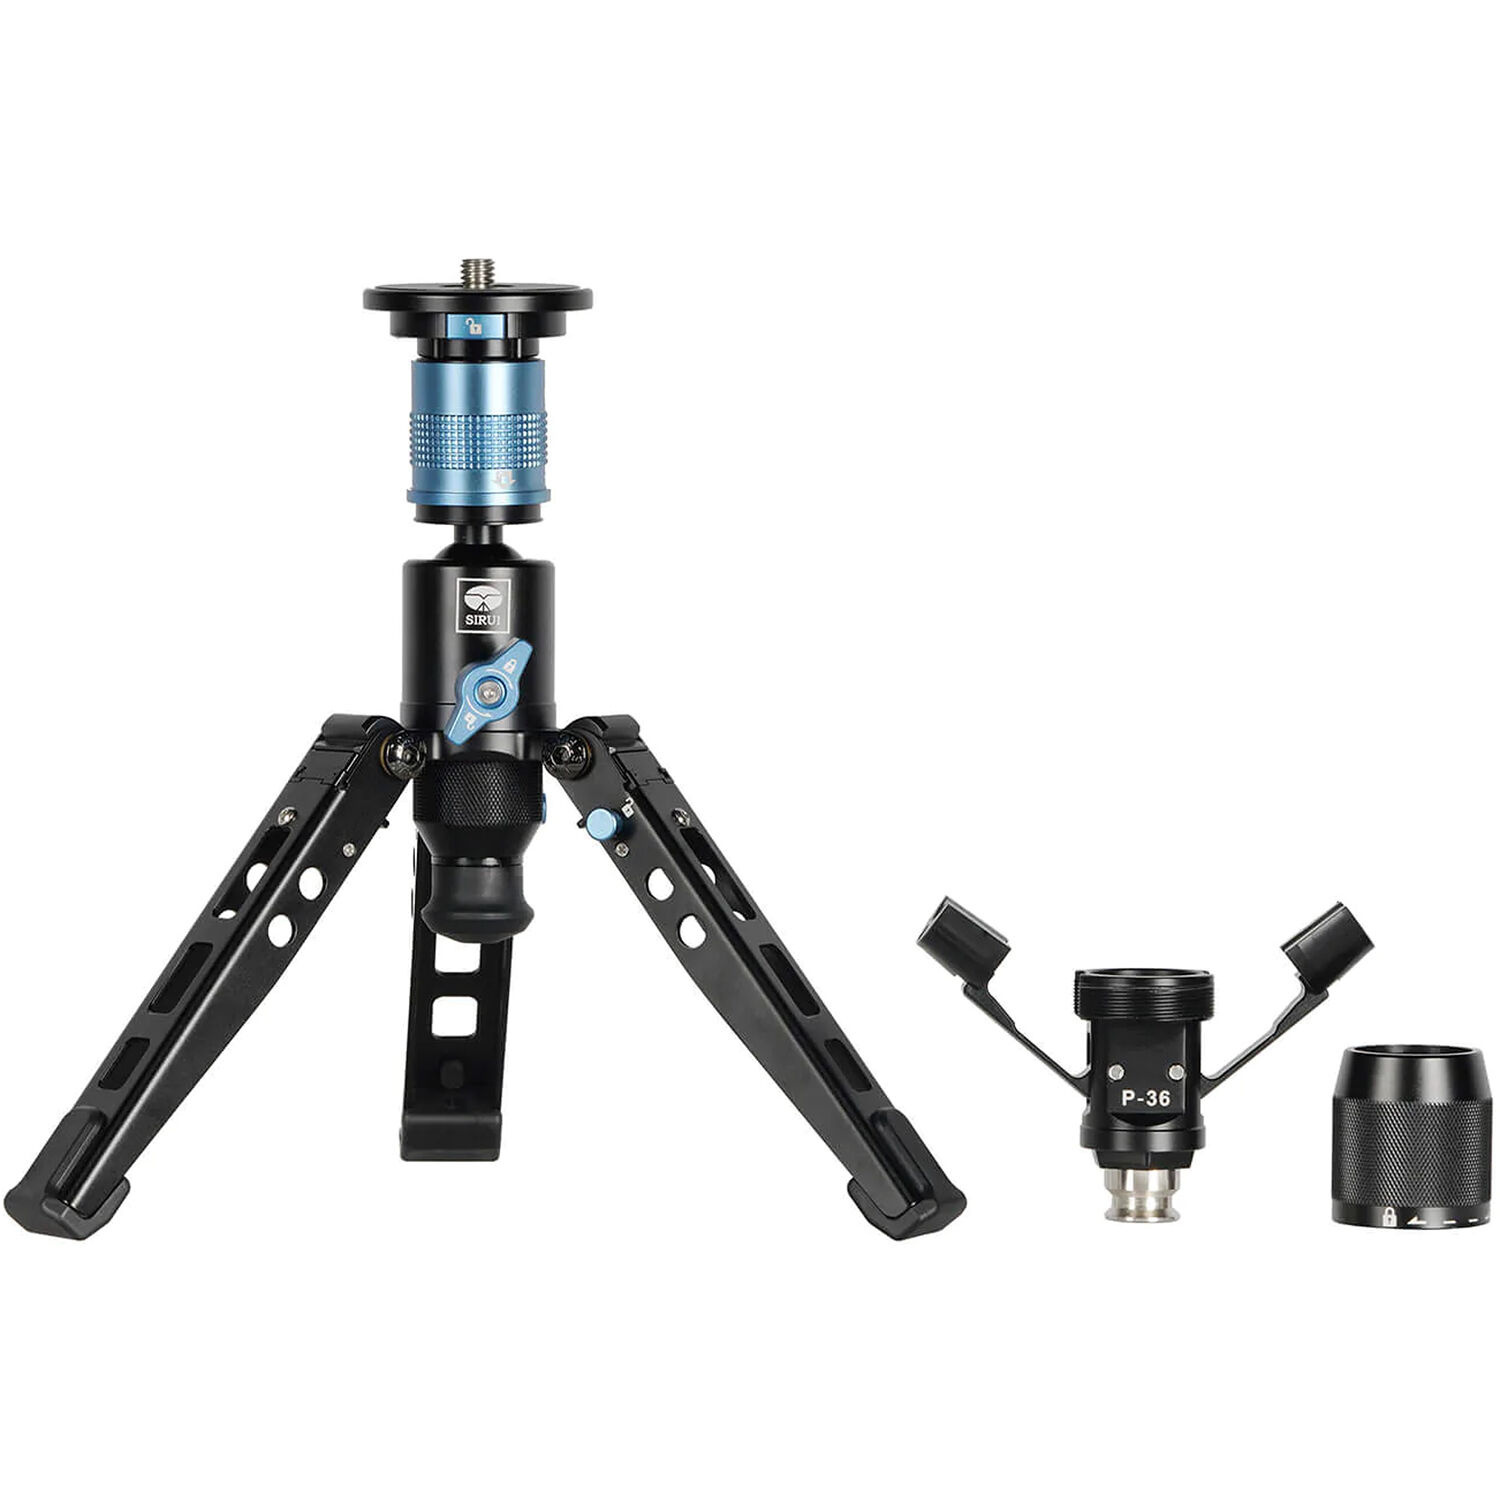 Sirui P36 Adapter Kit with Tripod Base for P-306 and P-326 Monopods